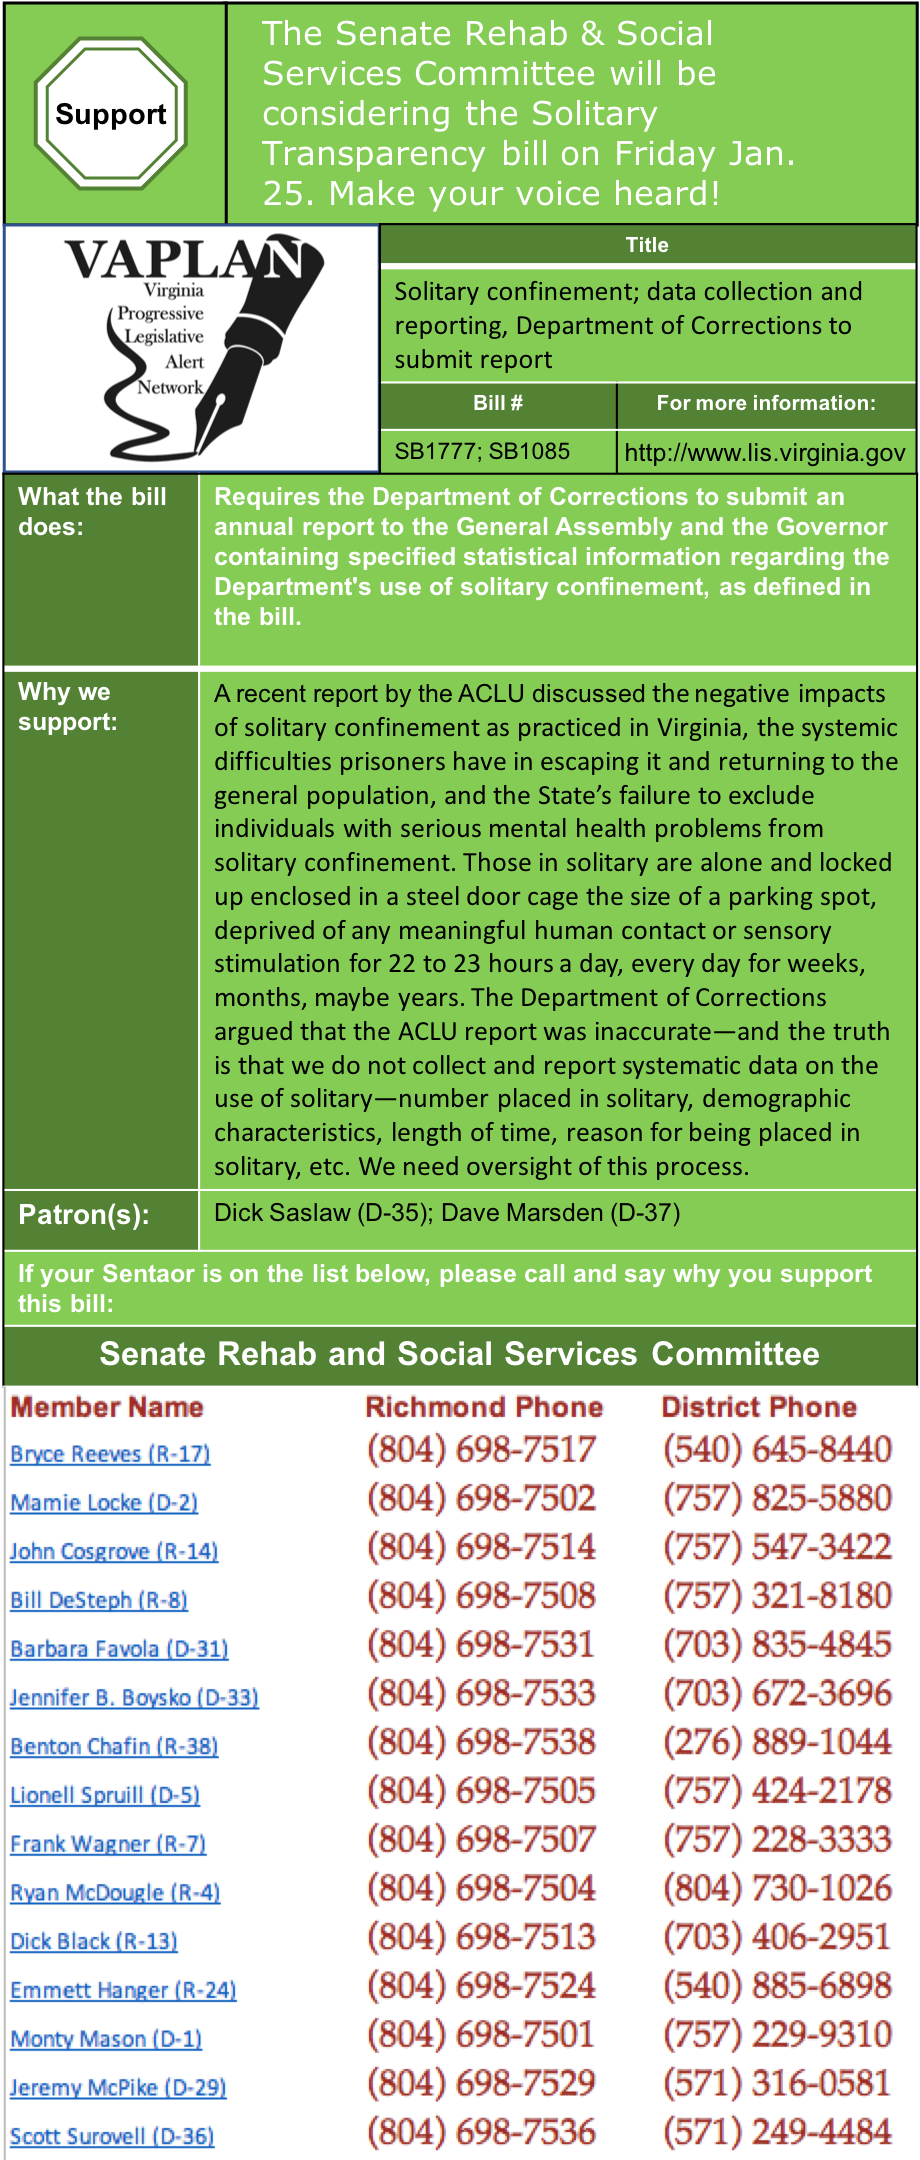 ALERT: Senate Rehab and Social Services to hear Solitary Transparency Bill Friday Jan. 25